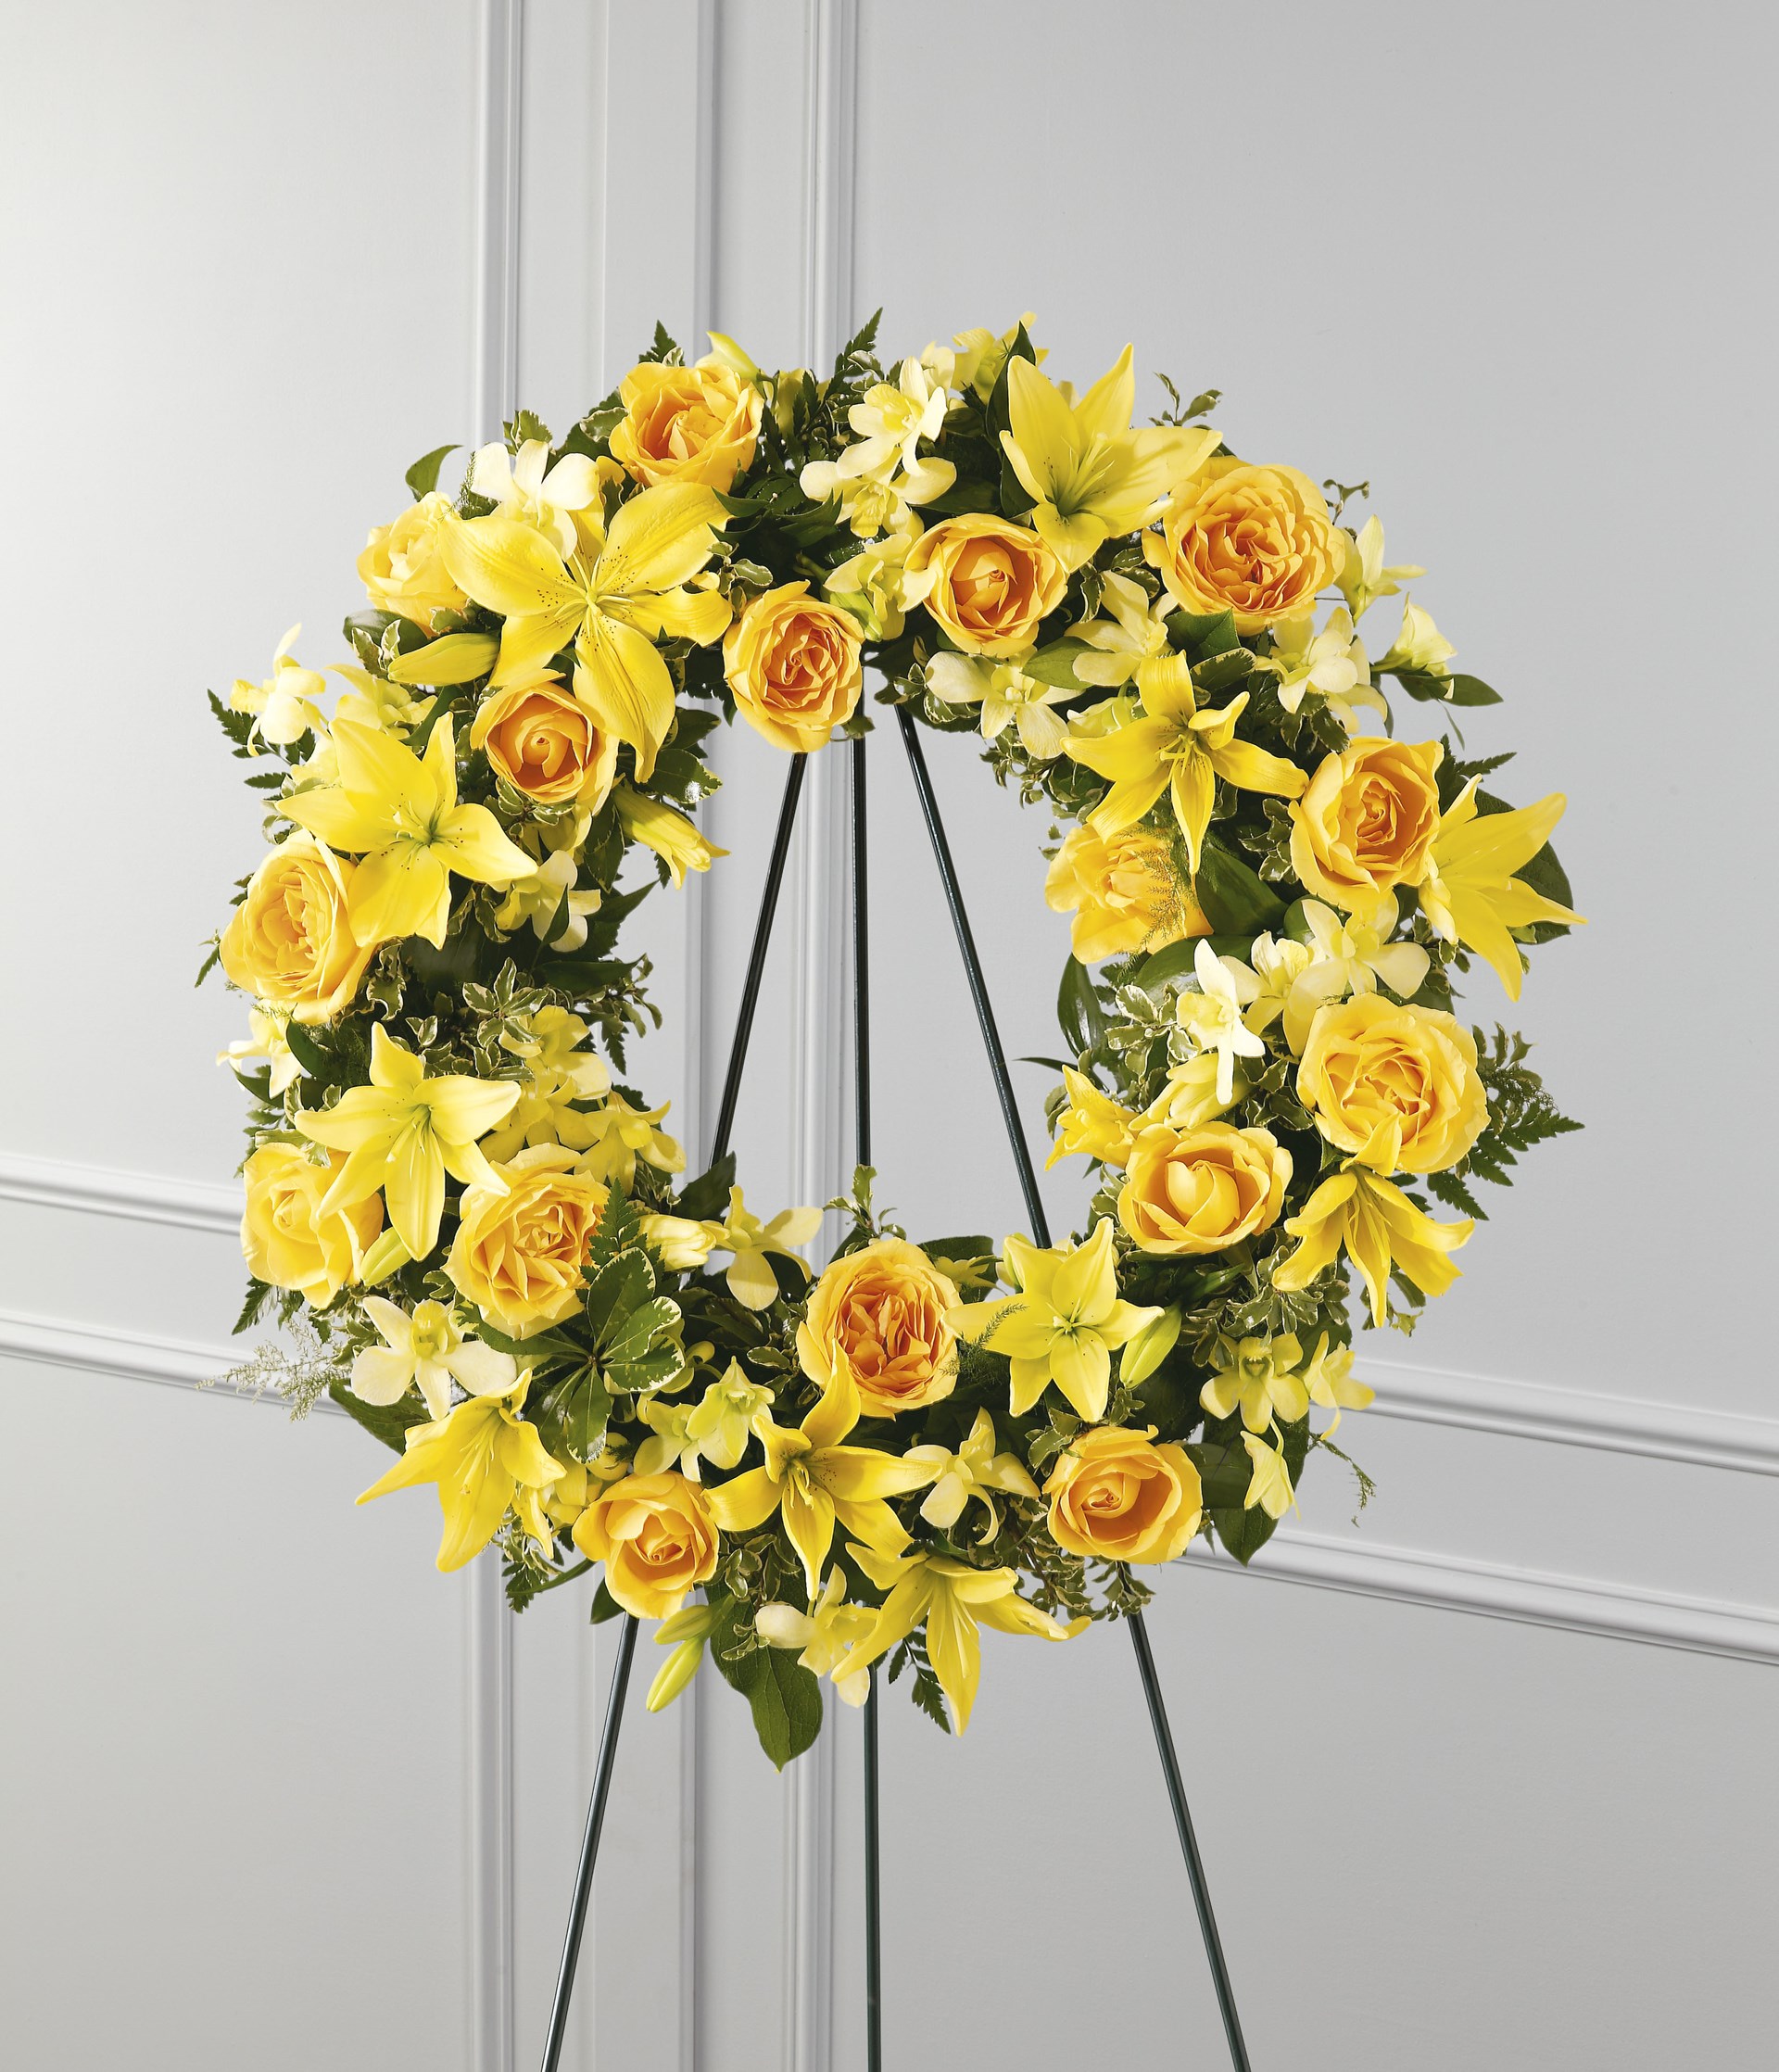 product image for The FTD Ring of Friendship Wreath